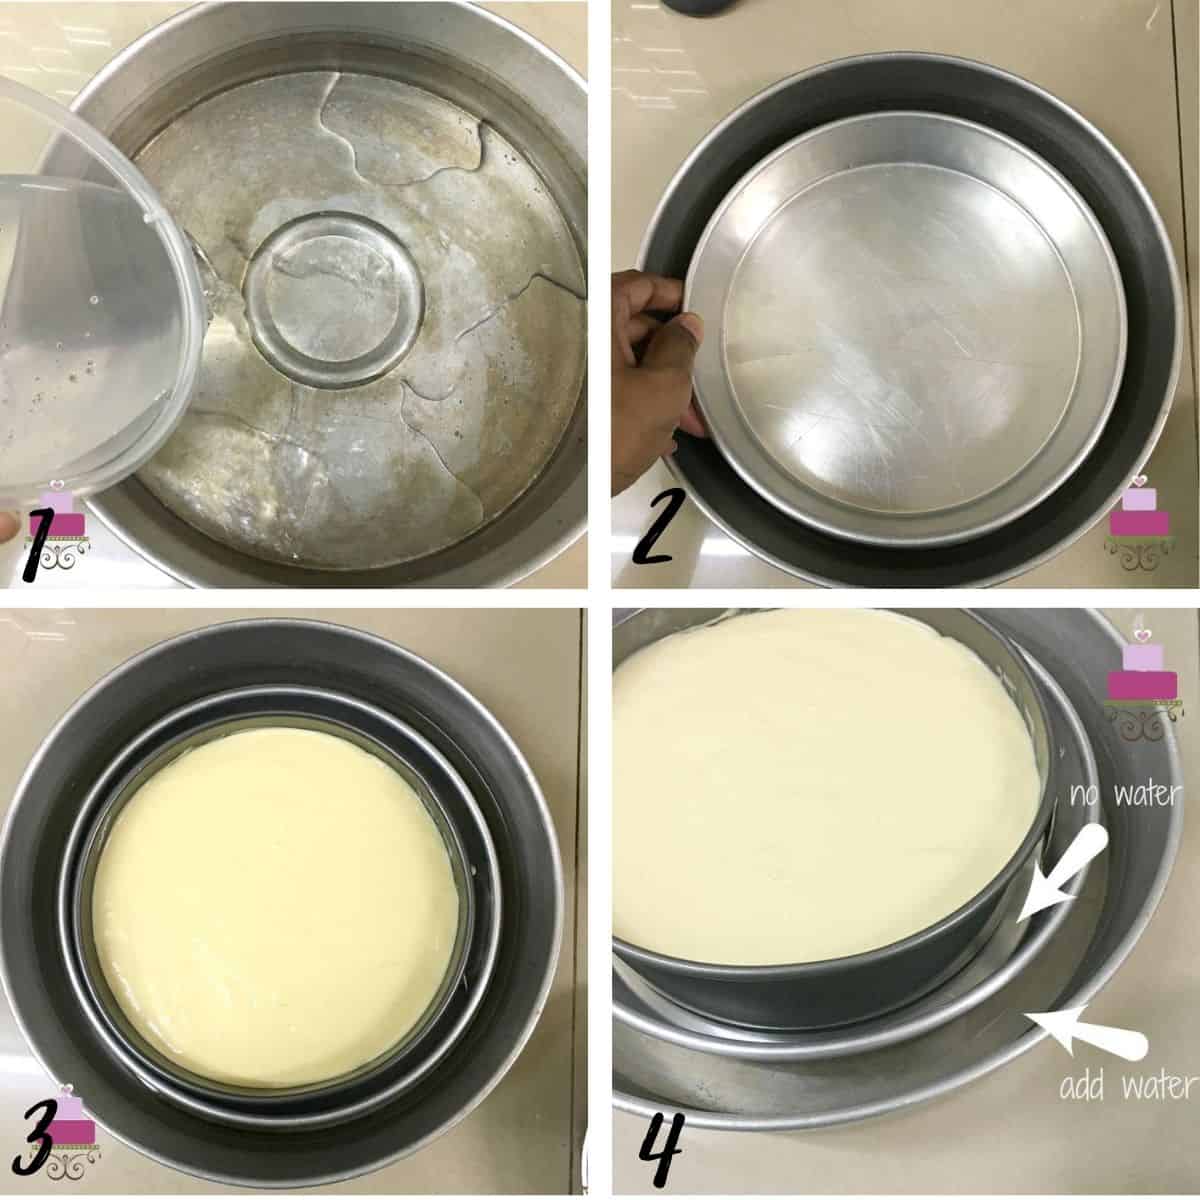 A poster of 4 images showing how to do a water bath for cheesecakes